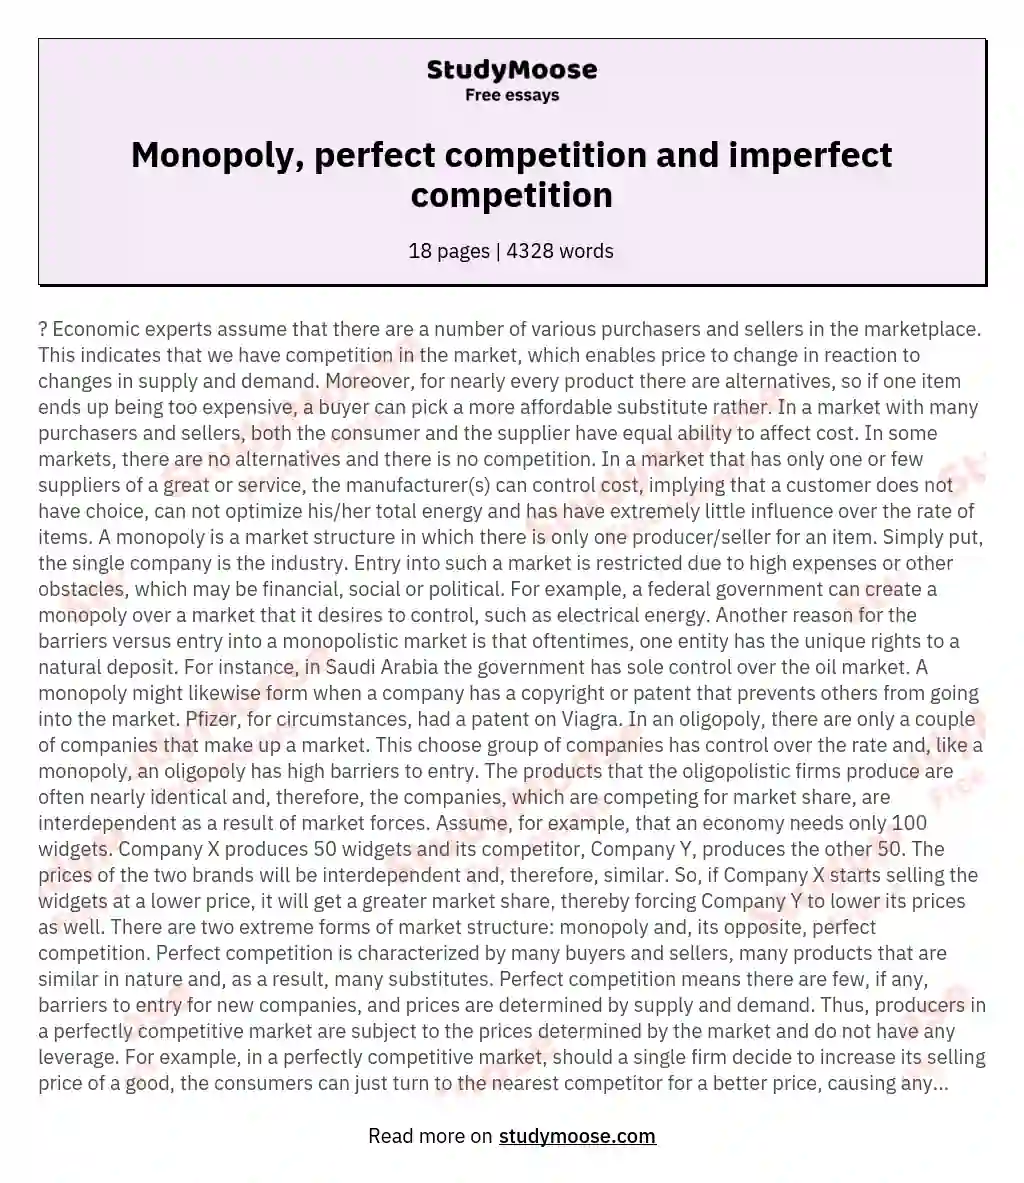 Monopoly, perfect competition and imperfect competition